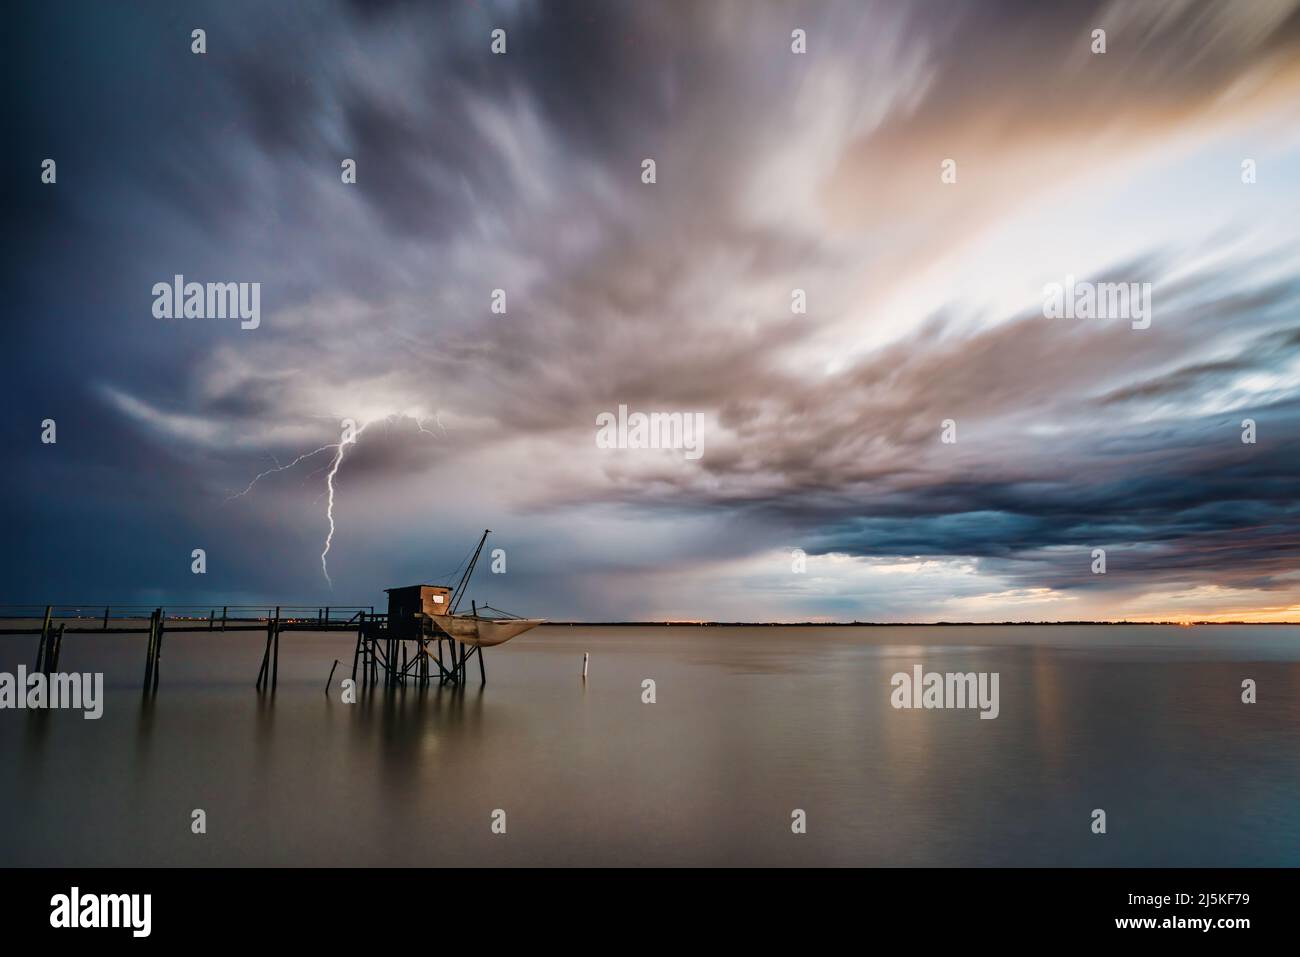 Dramatic storm clouds and calm sea at sunset west Atlantic coast France Gironde estuary, Charente Maritime with lightning strike on ocean horizon Stock Photo